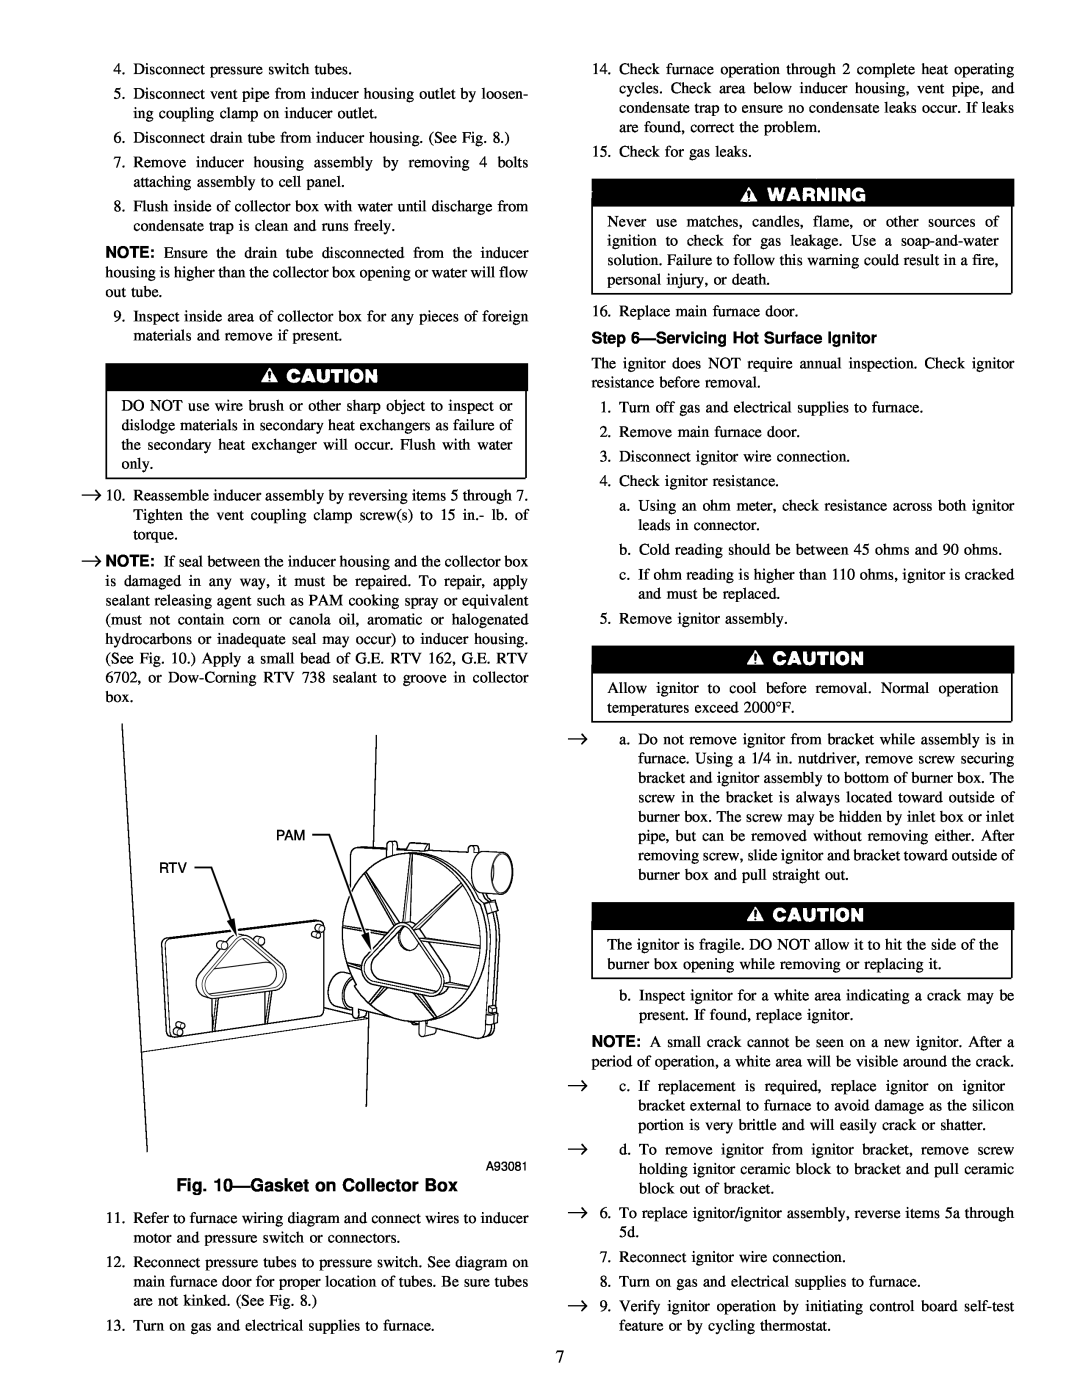 Carrier 58MSA instruction manual ÐGasket on Collector Box, ÐServicing Hot Surface Ignitor 